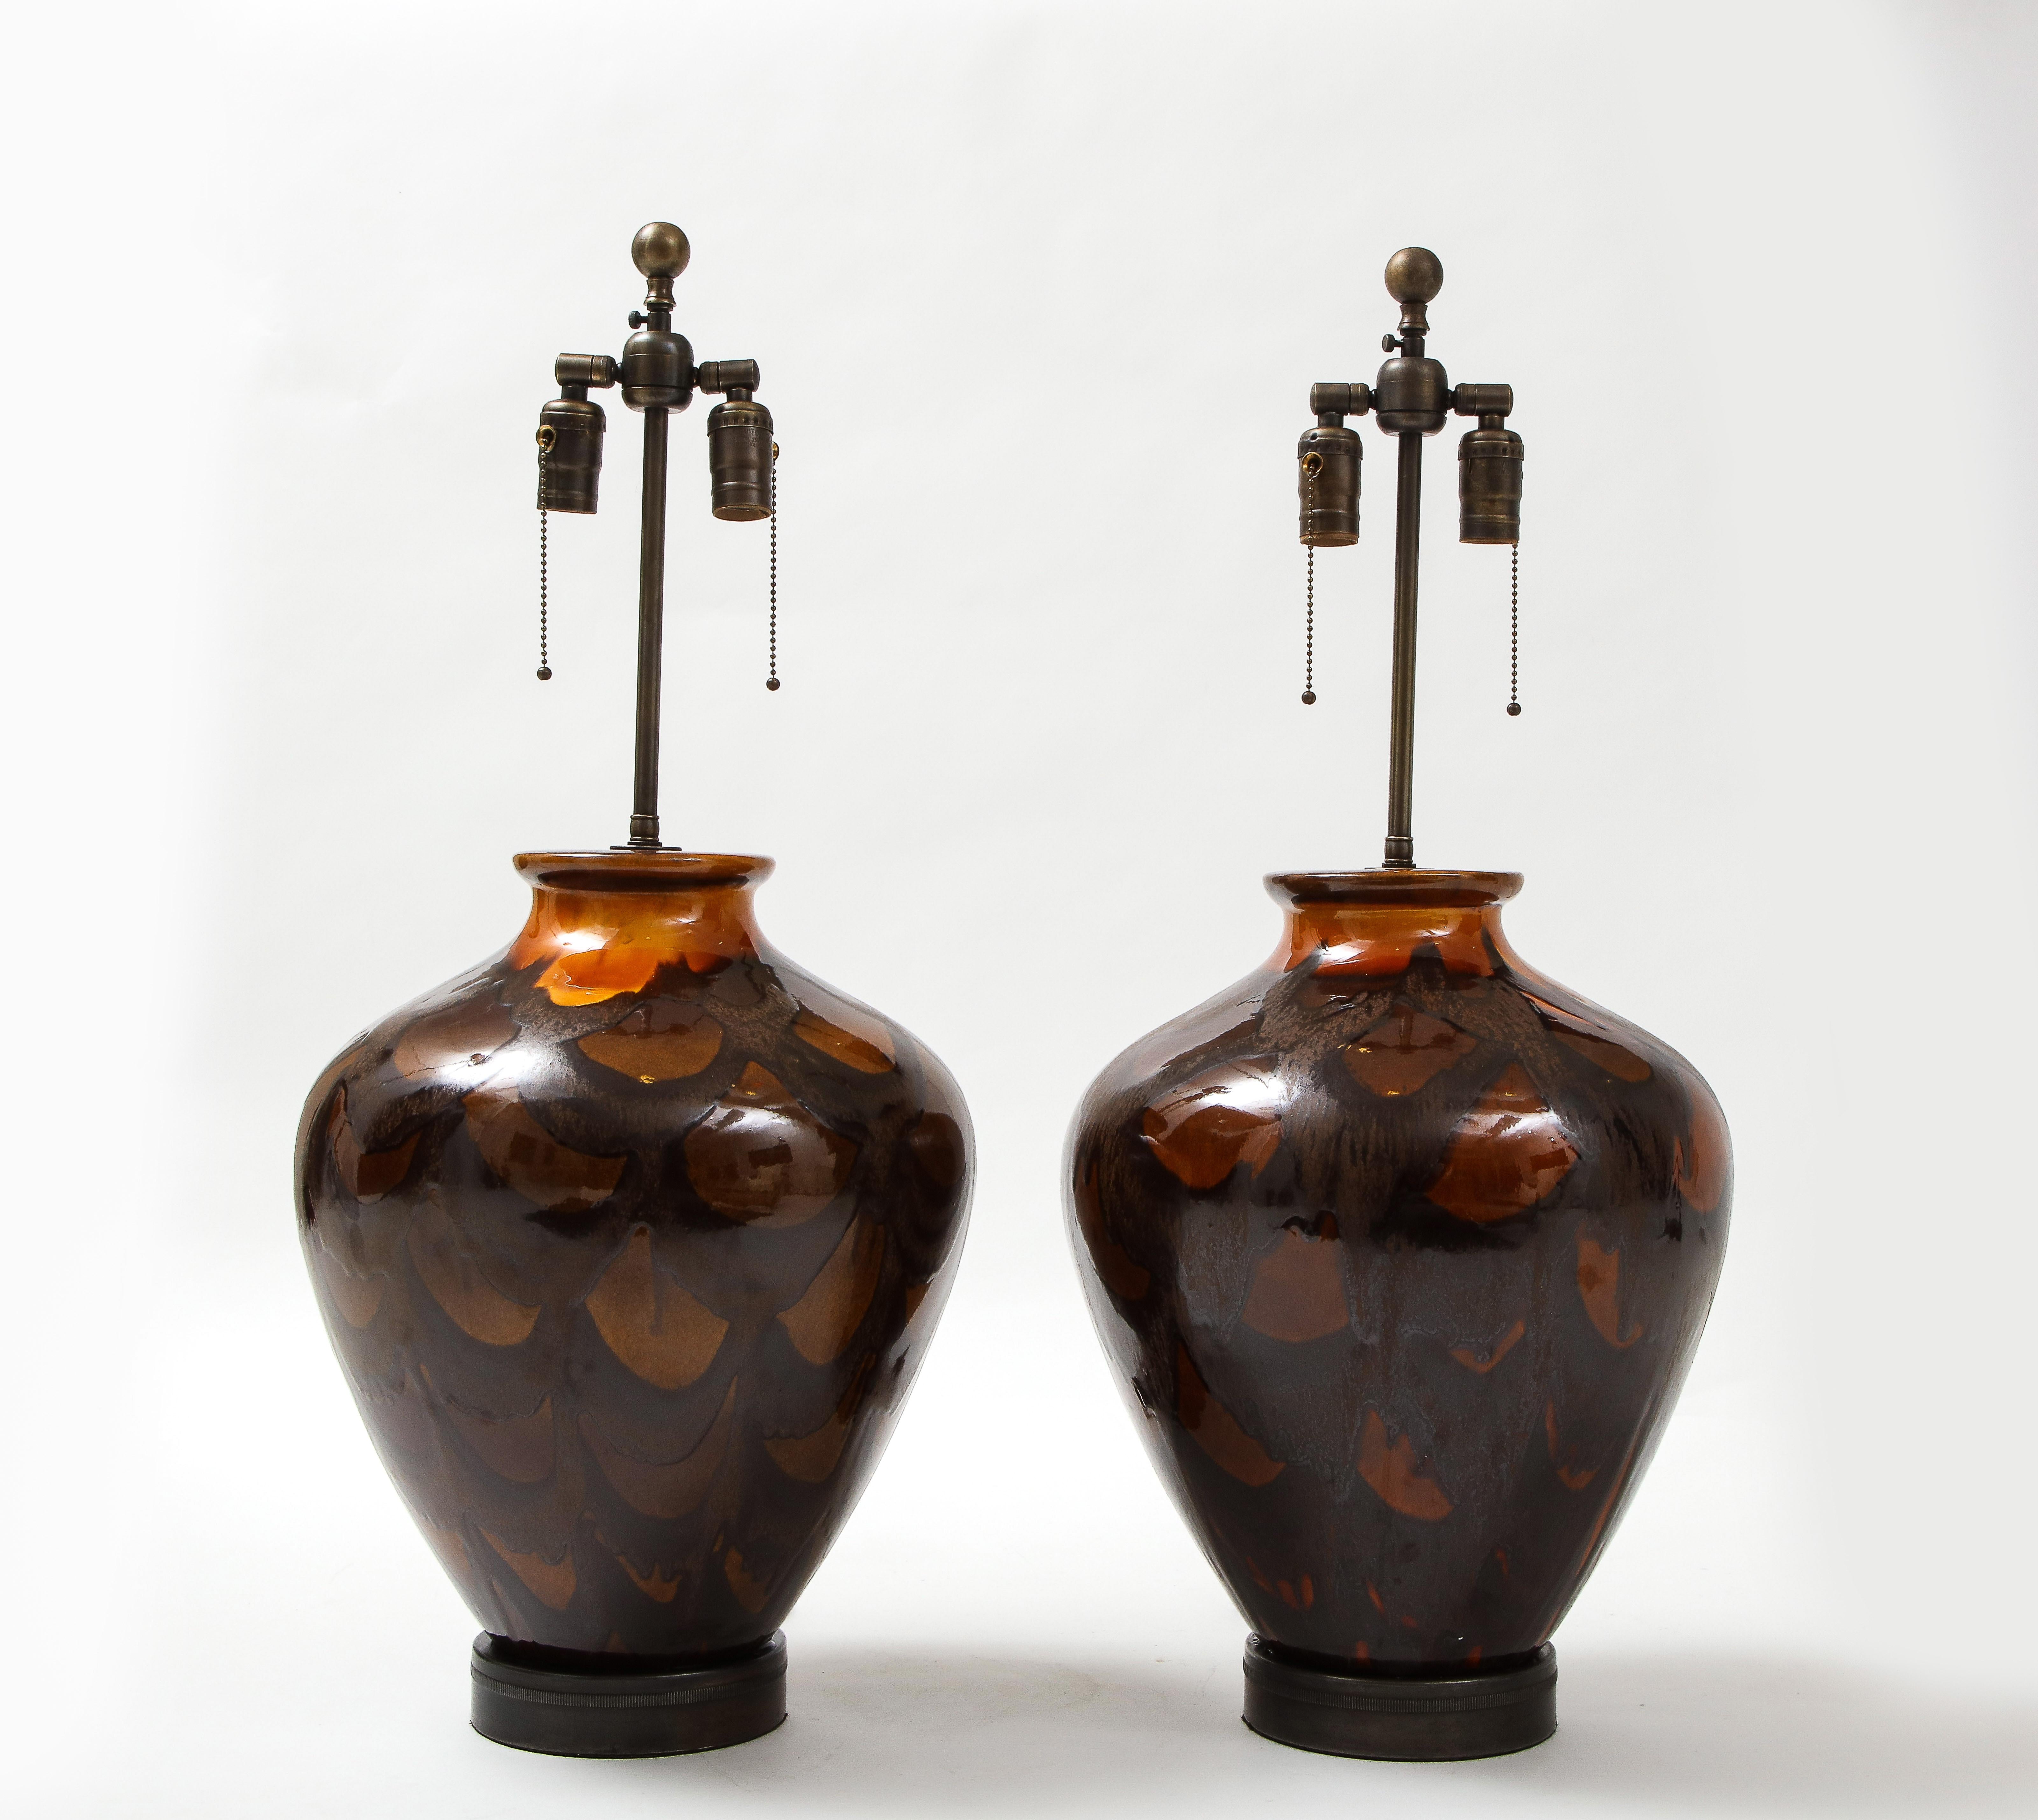 Pair of large scale modernist Italian pottery lamps with a stylized tortoise shell, burnt orange glaze. Lamps sit on aged bronze bases and feature double pull chain sockets. 75W max each socket.